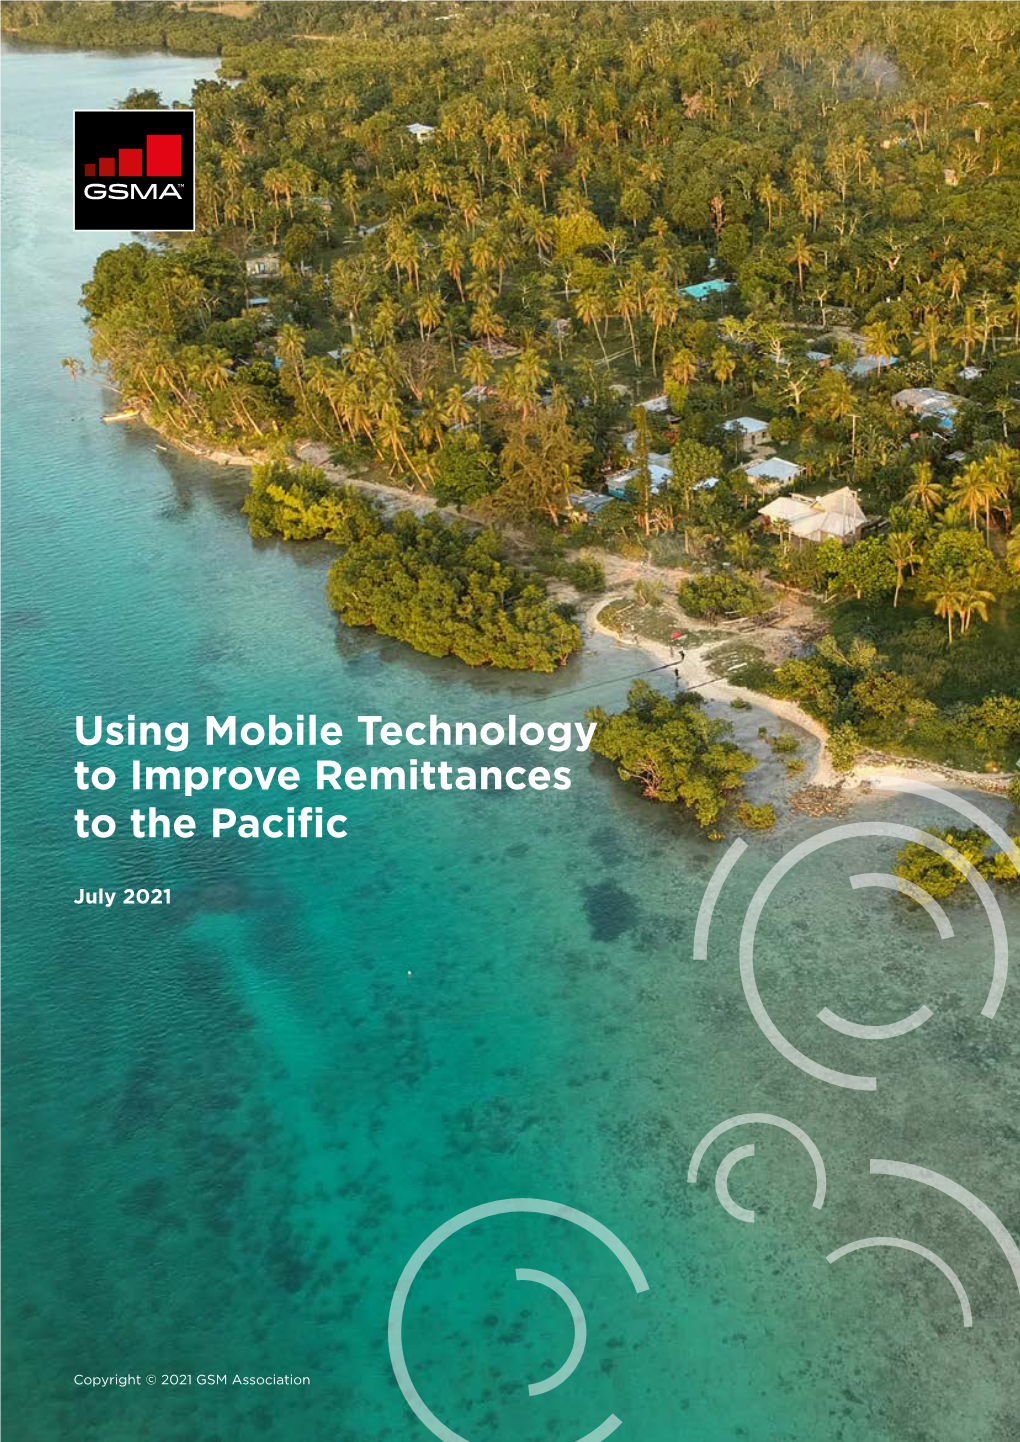 Using Mobile Technology to Improve Remittances to the Pacific